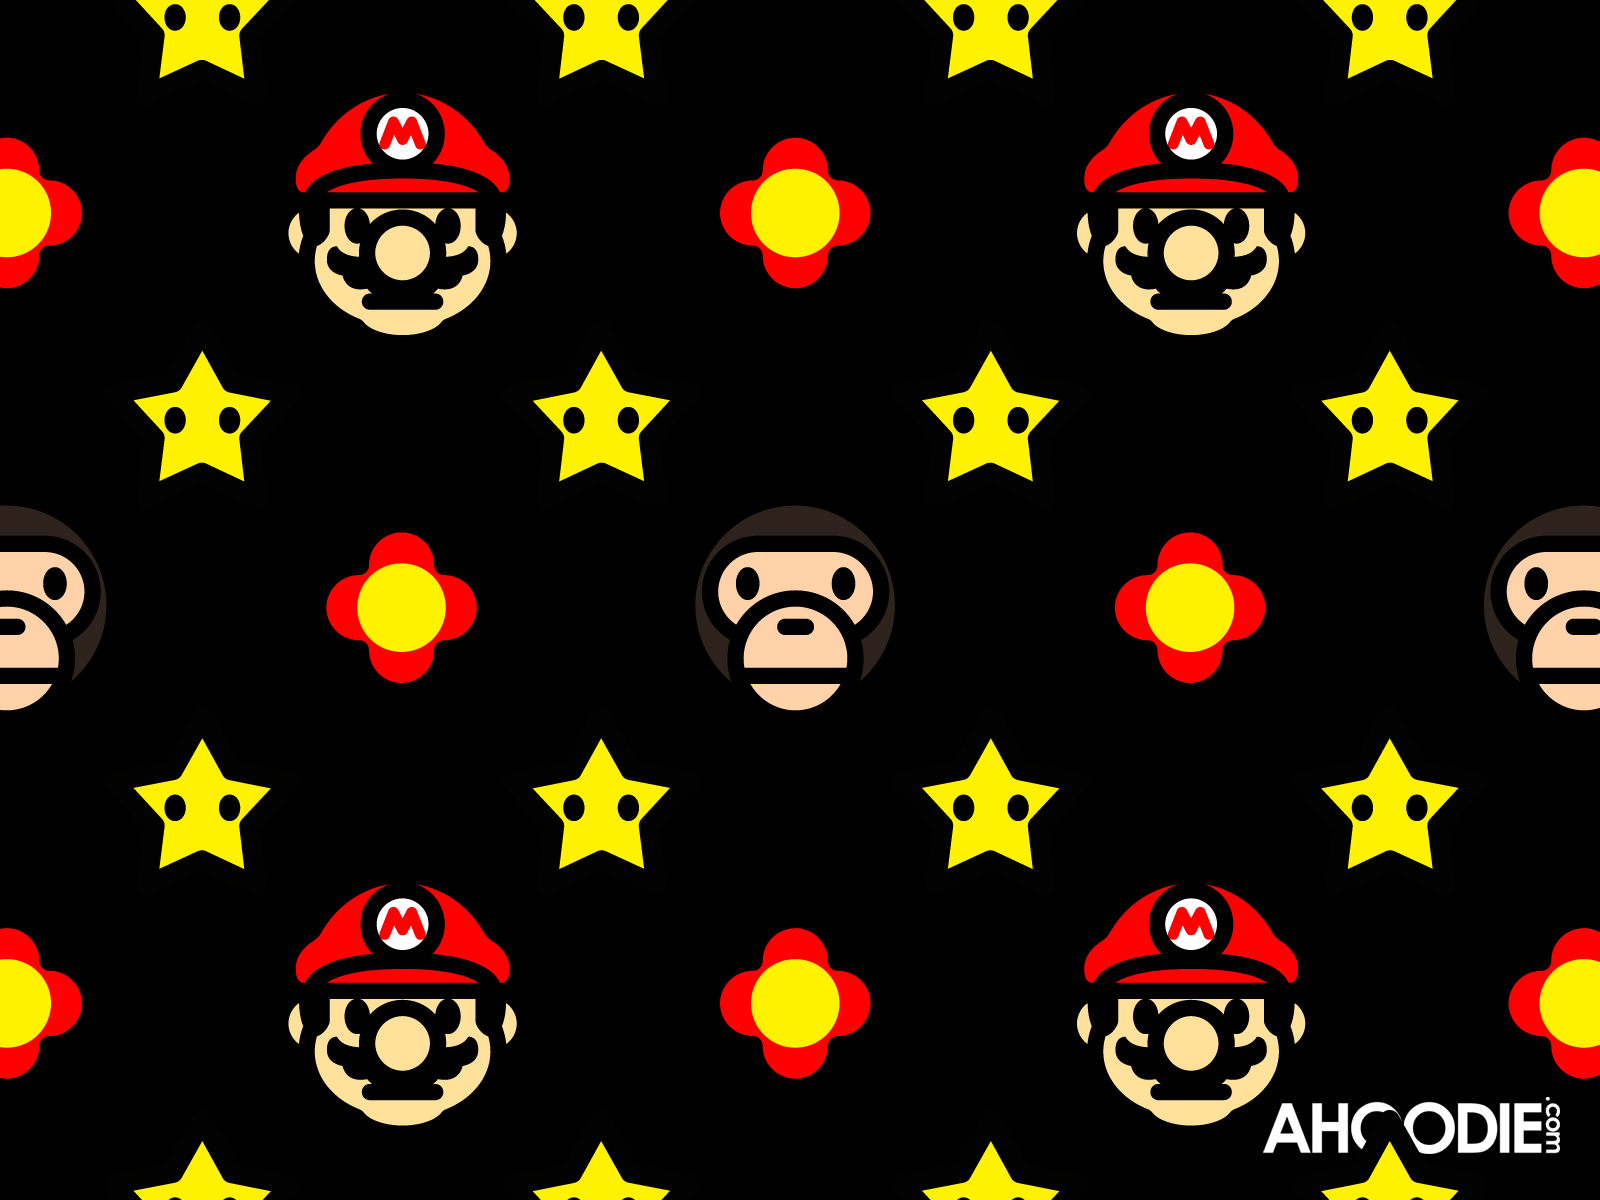   mario to milo new star flowers all over wallpaper awesome ahoodie4